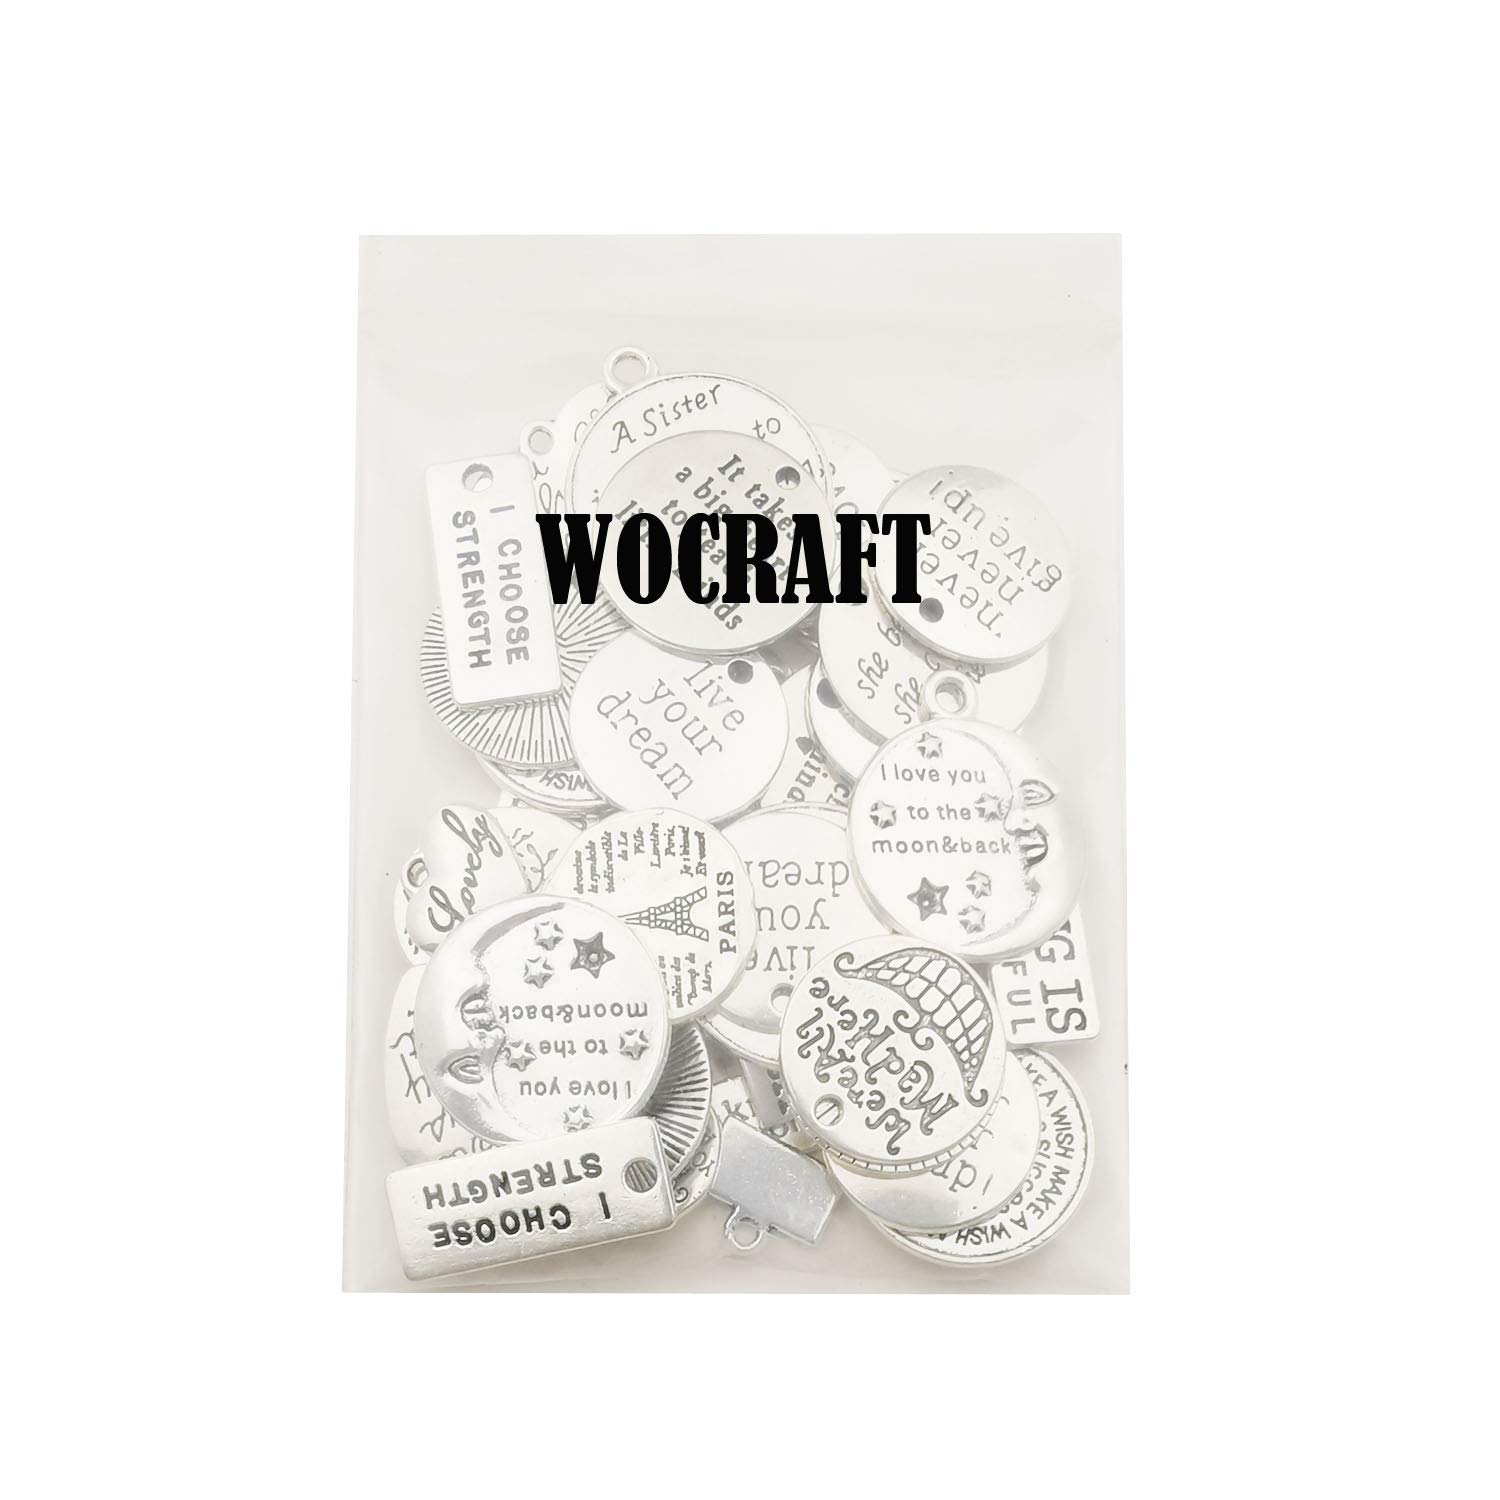 40pcs Inspiration Words Charms Craft Supplies Beads Charms Pendants for Jewelry Making Crafting Findings Accessory for DIY Necklace Bracelet (M331)